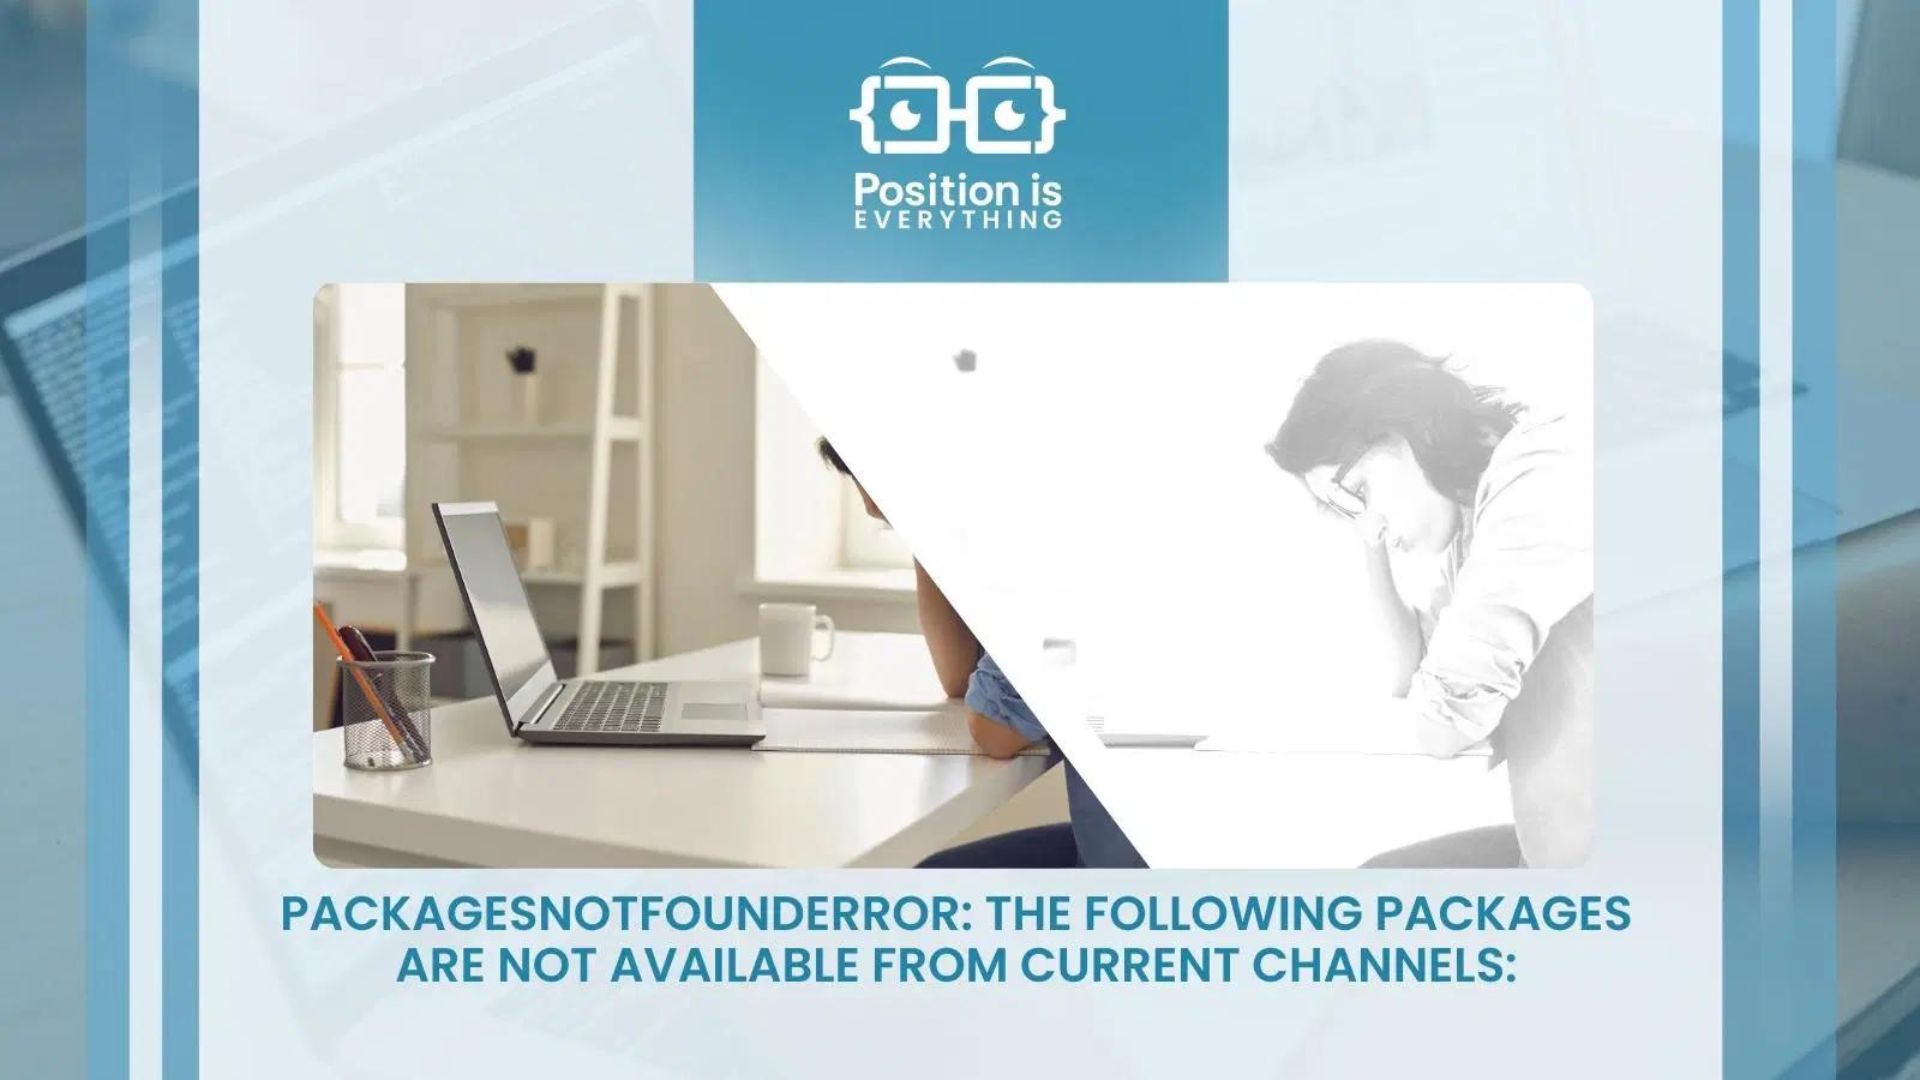 PackagesNotFoundError: The Following Packages Are Not Available From Current Channels